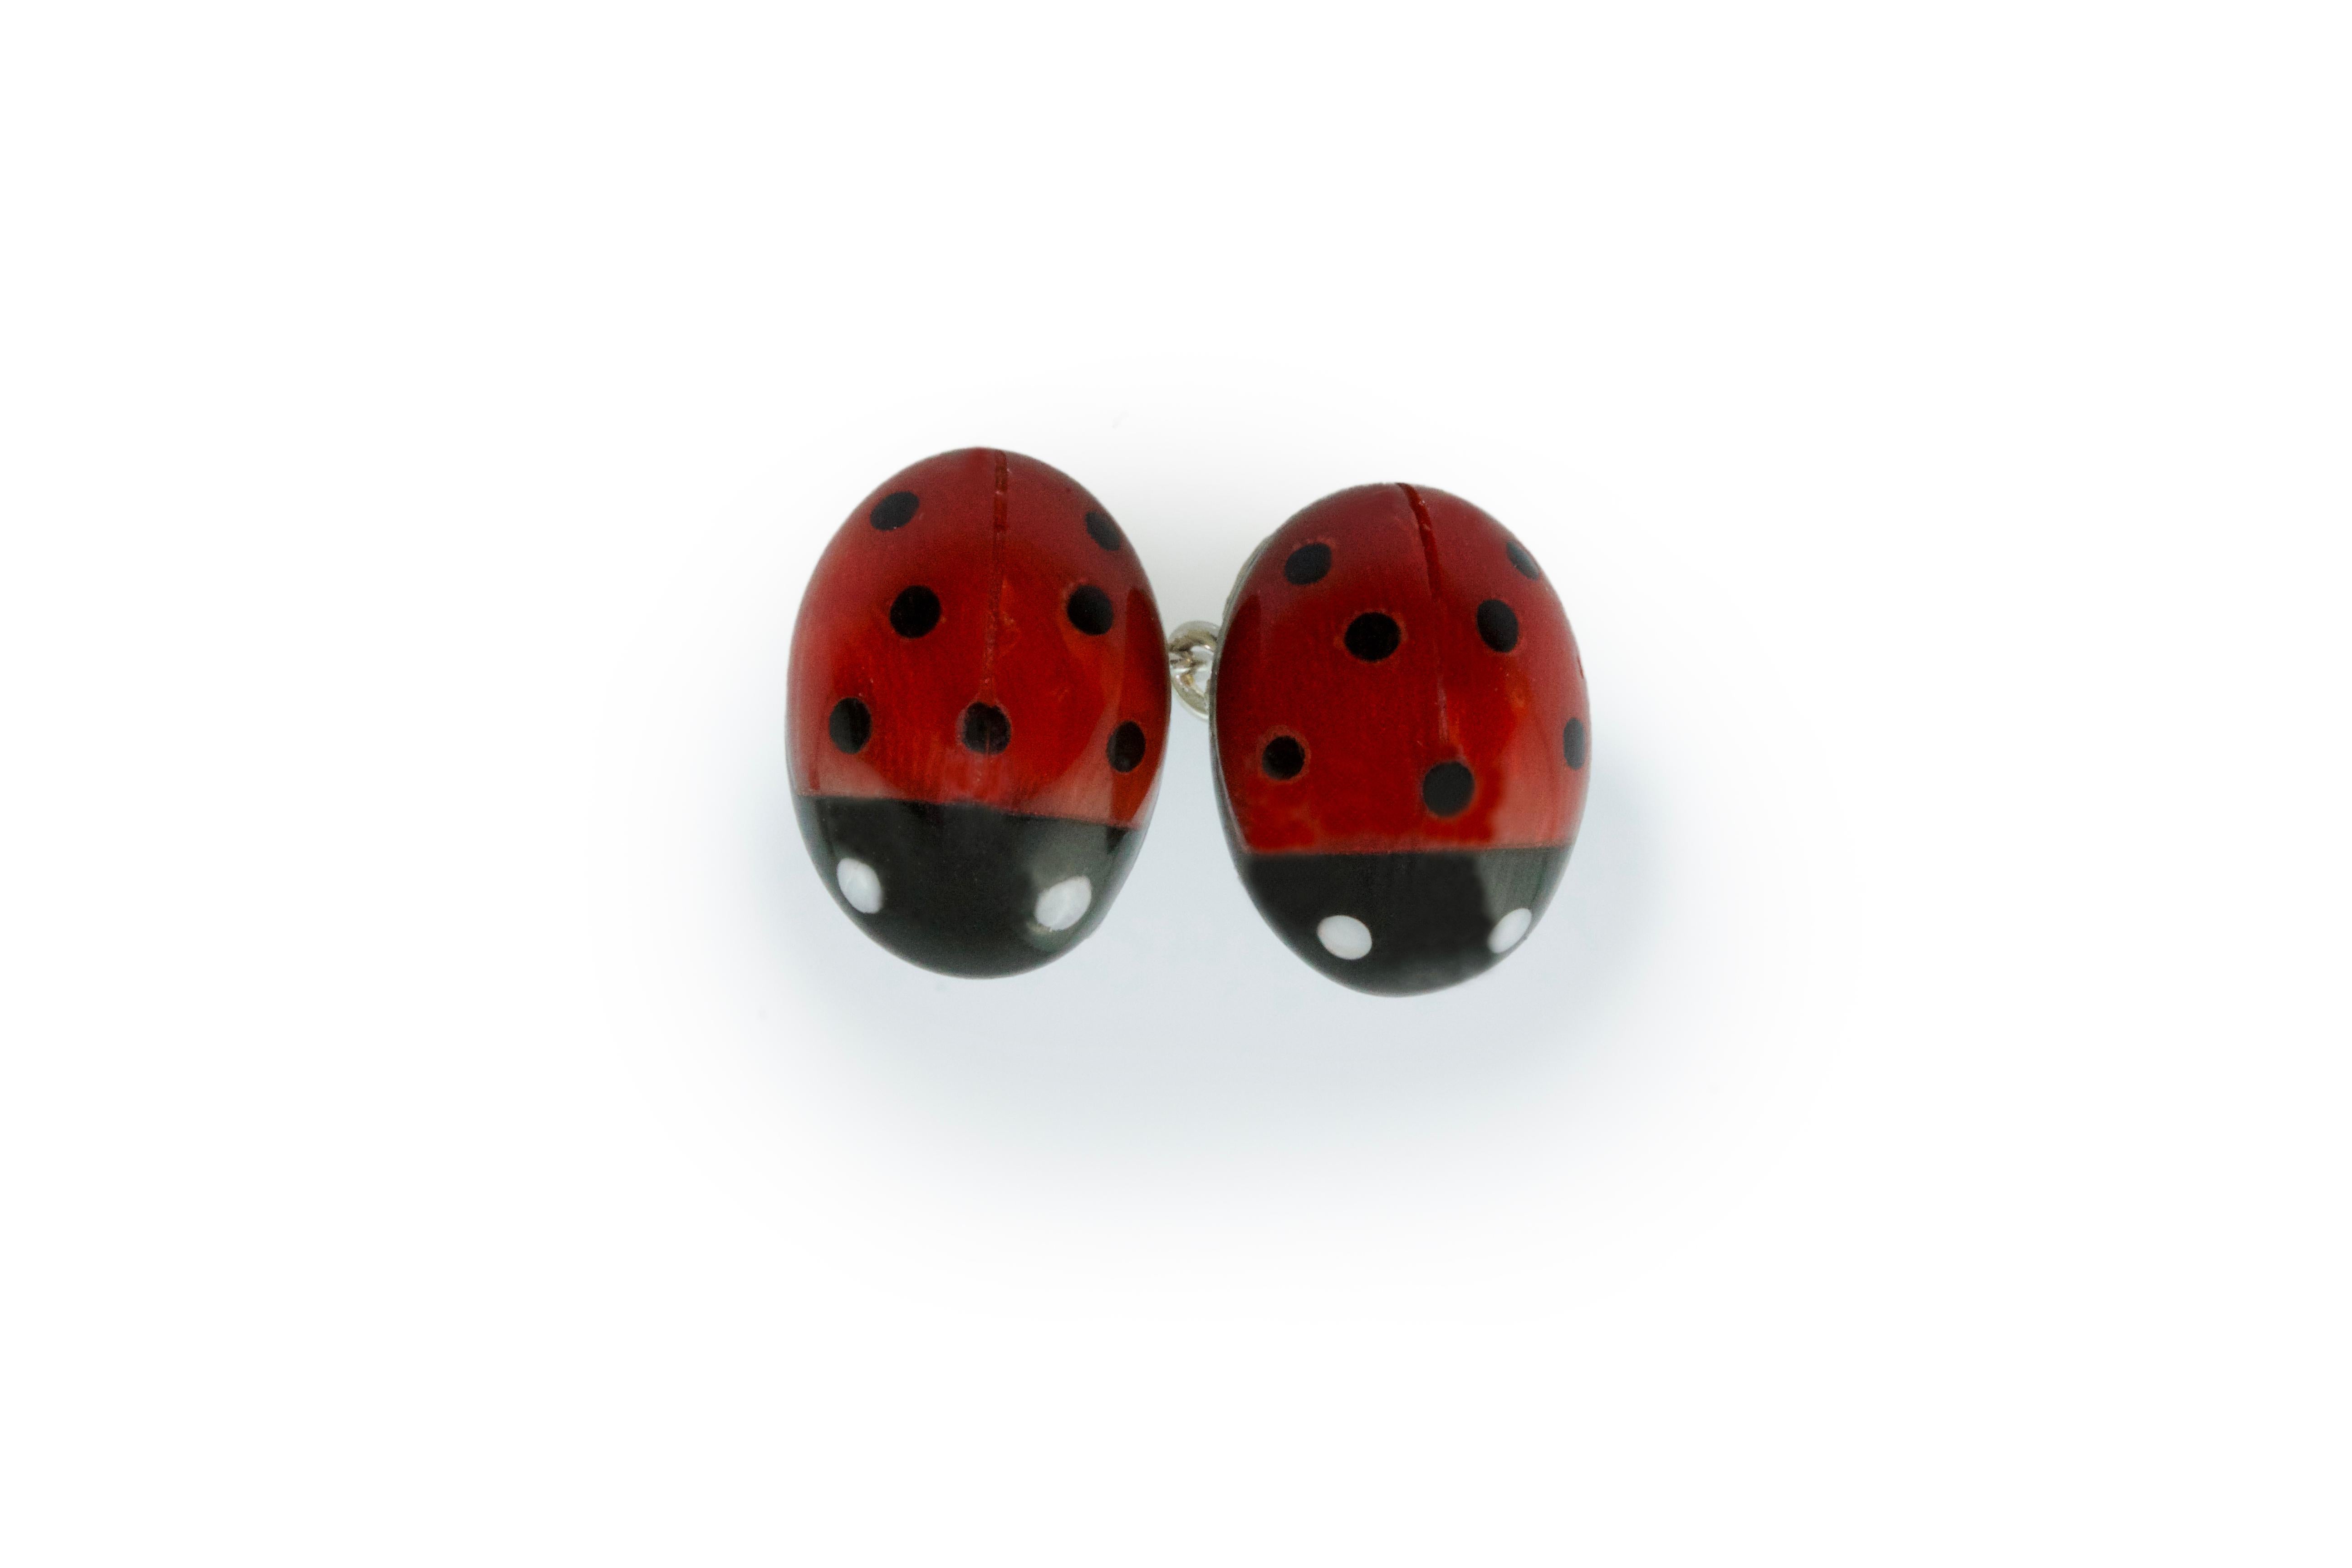 These elegant cufflinks are made of coral sourced in the Mediterranean and Onyx, both front face and toggle have been hand-carved shaped like a ladybug with a smooth, bulging surface. 
The post in the back is made of 18 karat white gold.

All